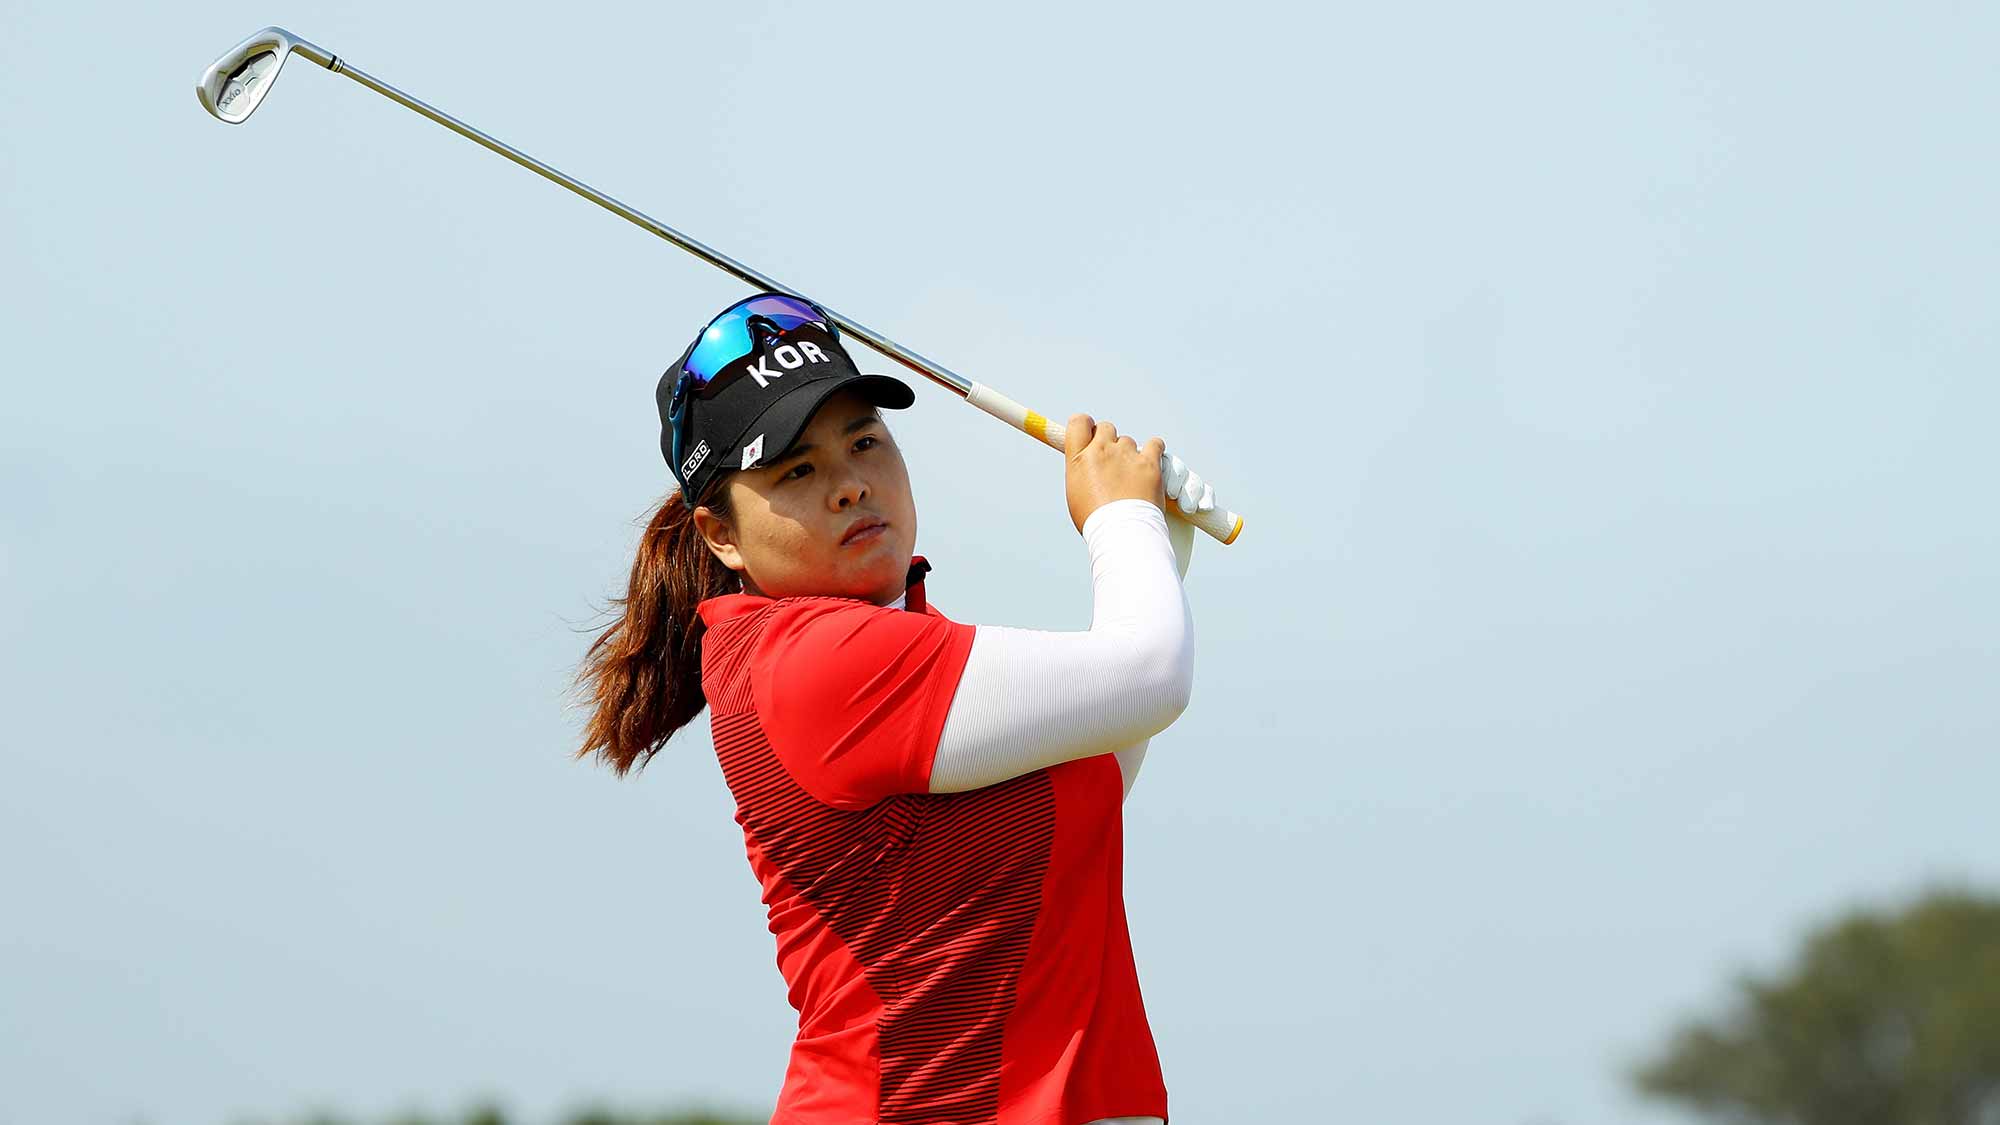 Inbee Park of Korea plays her shot from the sixth tee during the Women's Golf Final on Day 15 of the Rio 2016 Olympic Games at the Olympic Golf Course